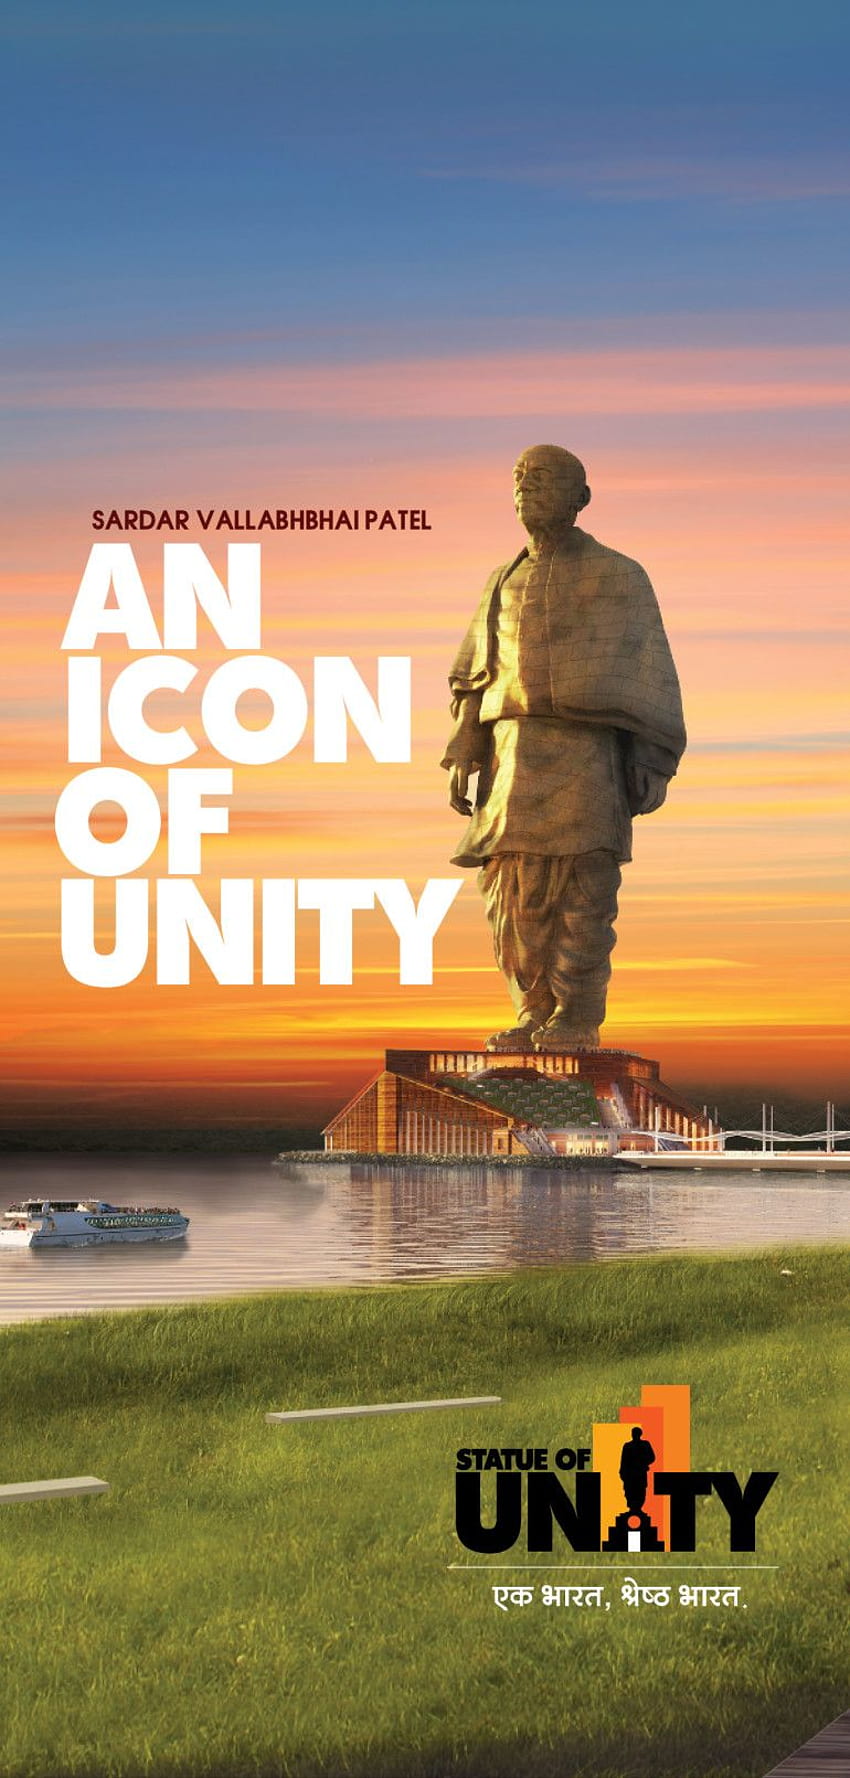 CodePen - CodeCamp - Build a Tribute Page, Statue of Unity HD phone wallpaper